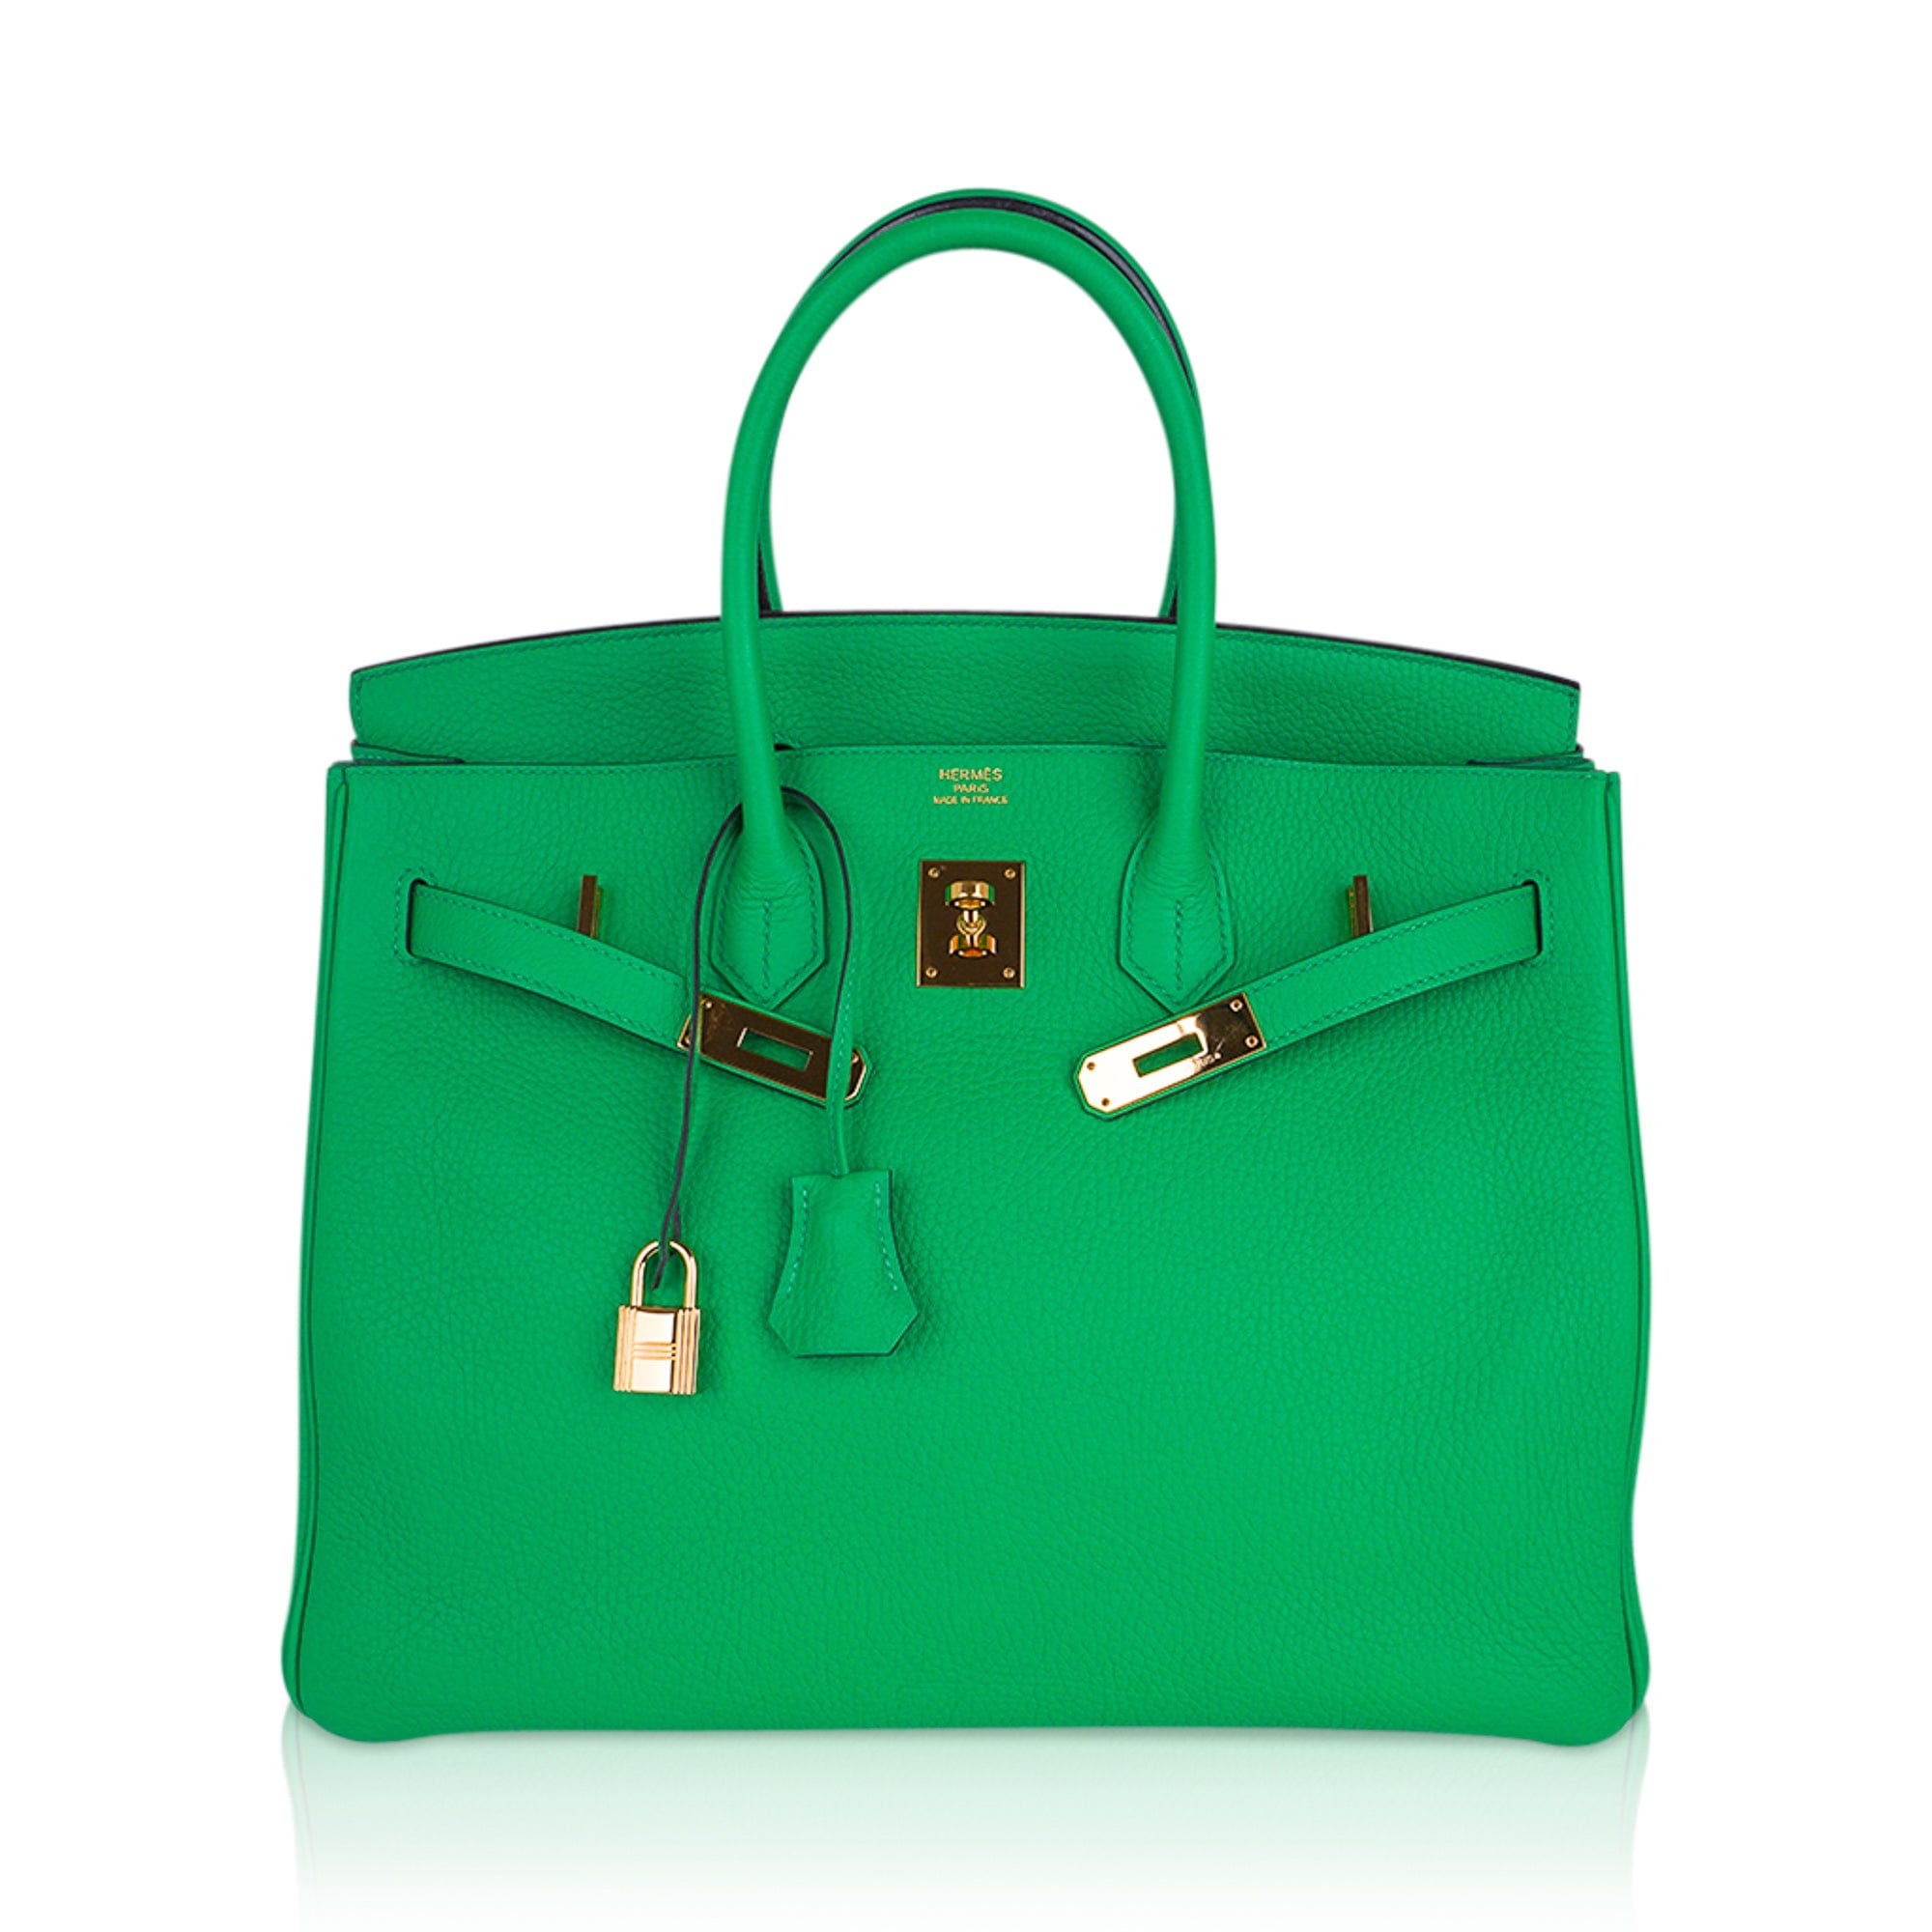 Hermès Chocolat Birkin 35cm of Togo Leather with Gold Hardware, Handbags  and Accessories Online, Ecommerce Retail